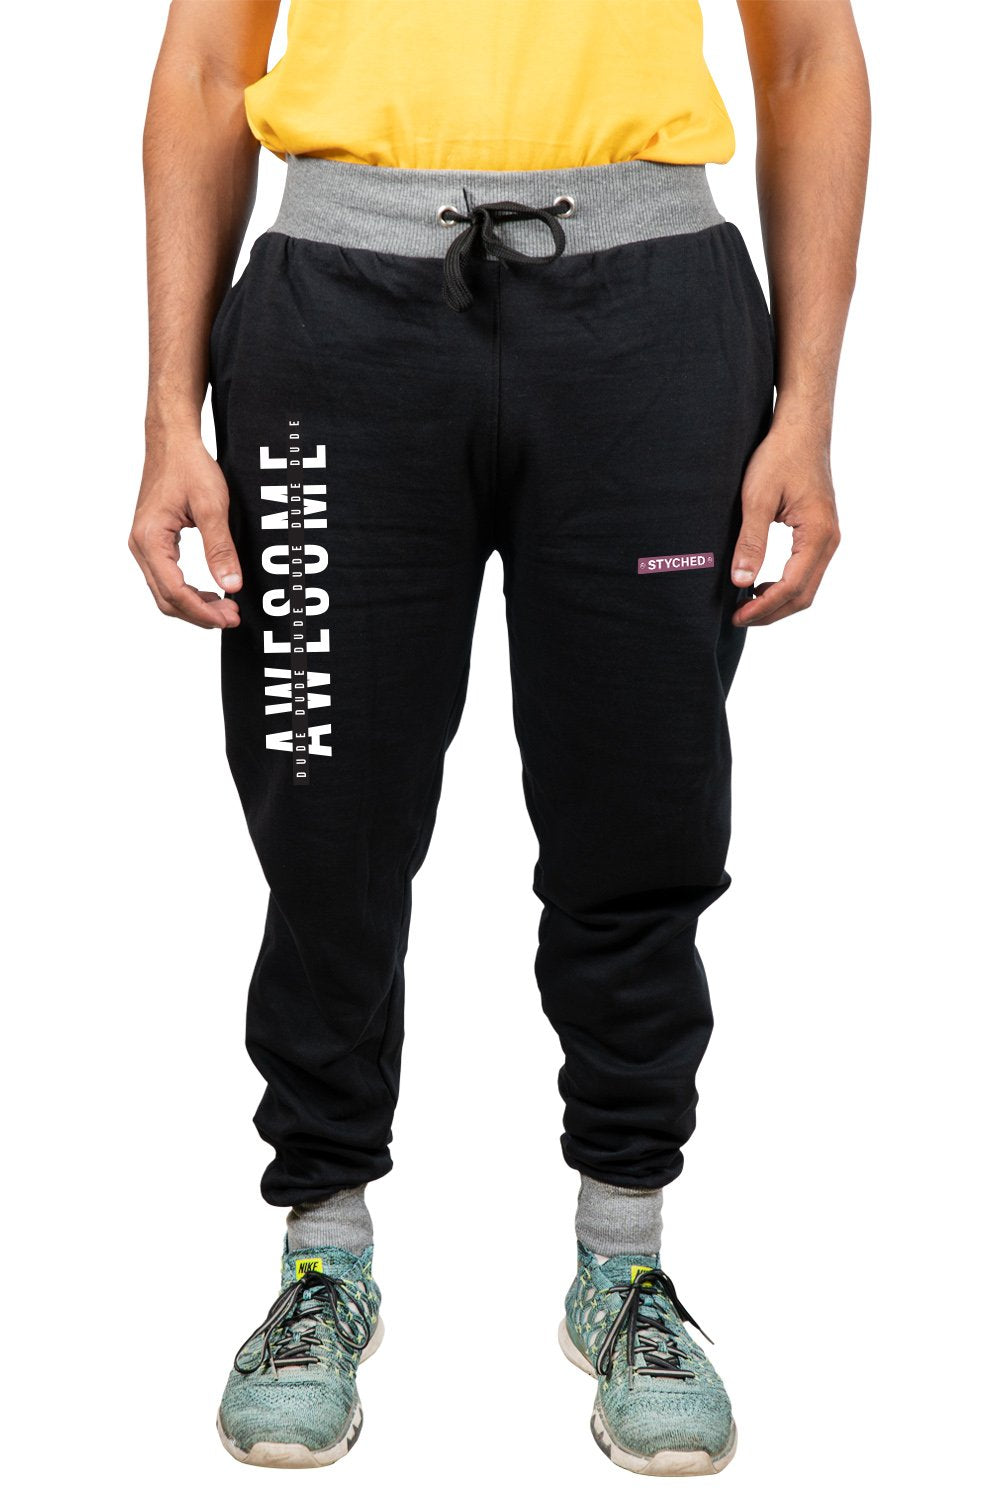 Awesome Dude Graphic Printed Black Breathable Joggers